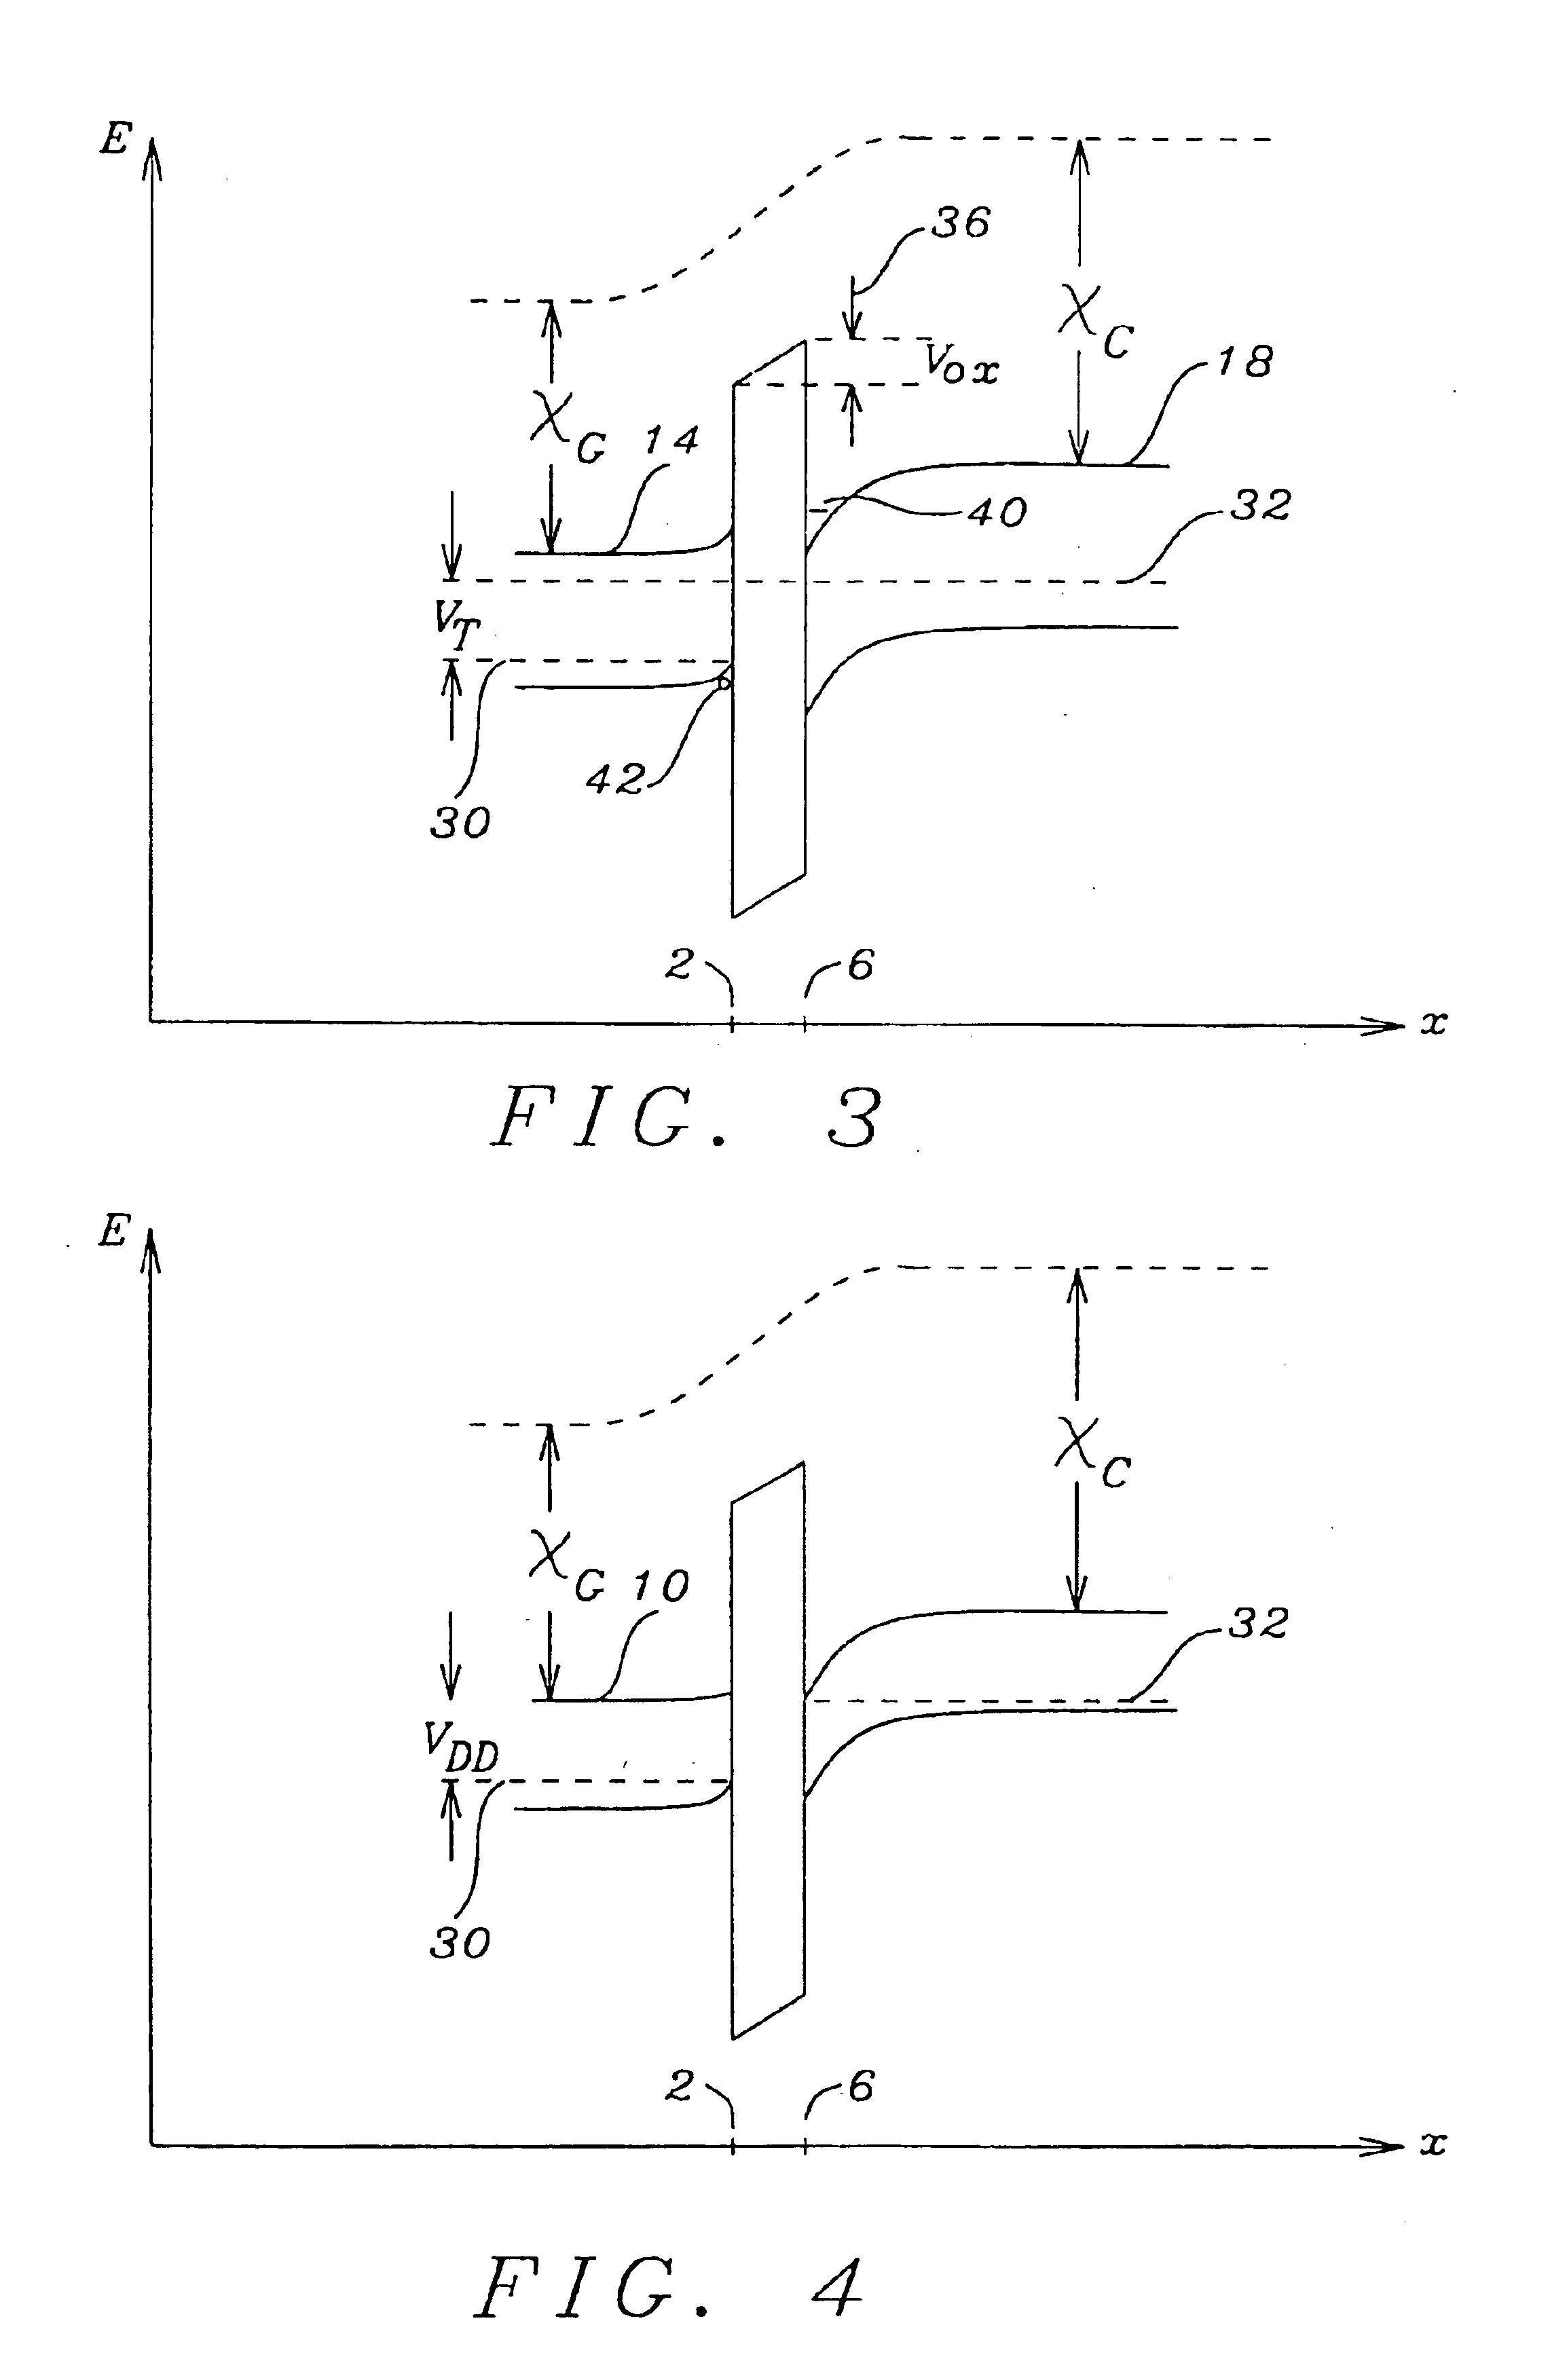 Suppression of MOSFET gate leakage current